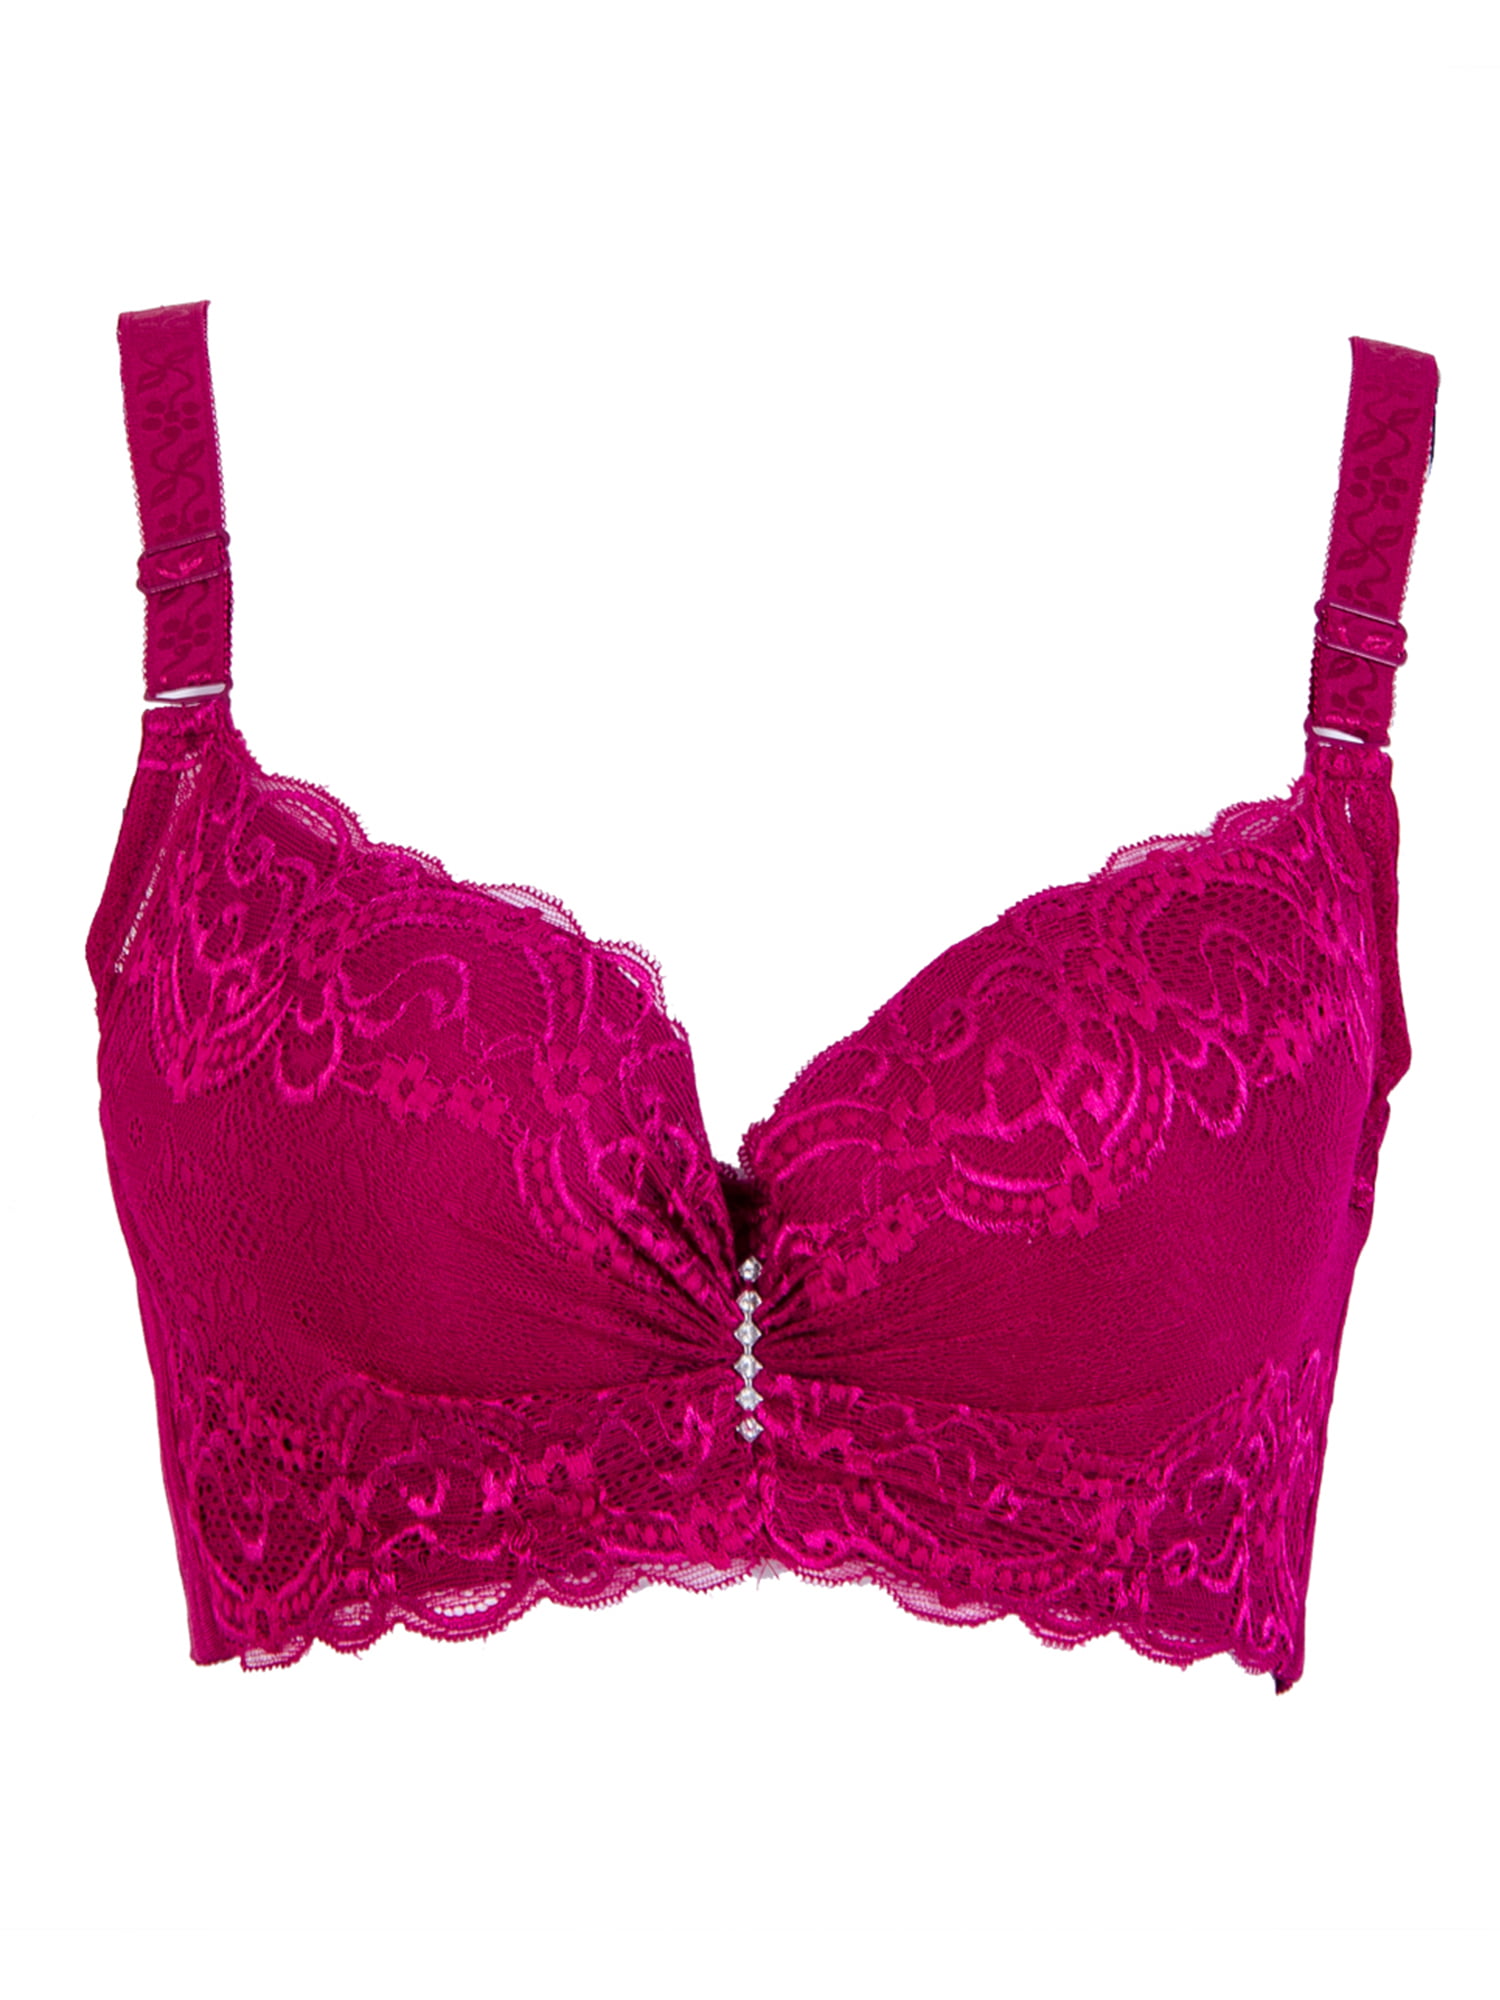 Women Bras Underwire Padded Up Embroidery Lace Bra Breathable Brassiere,C,36 Red